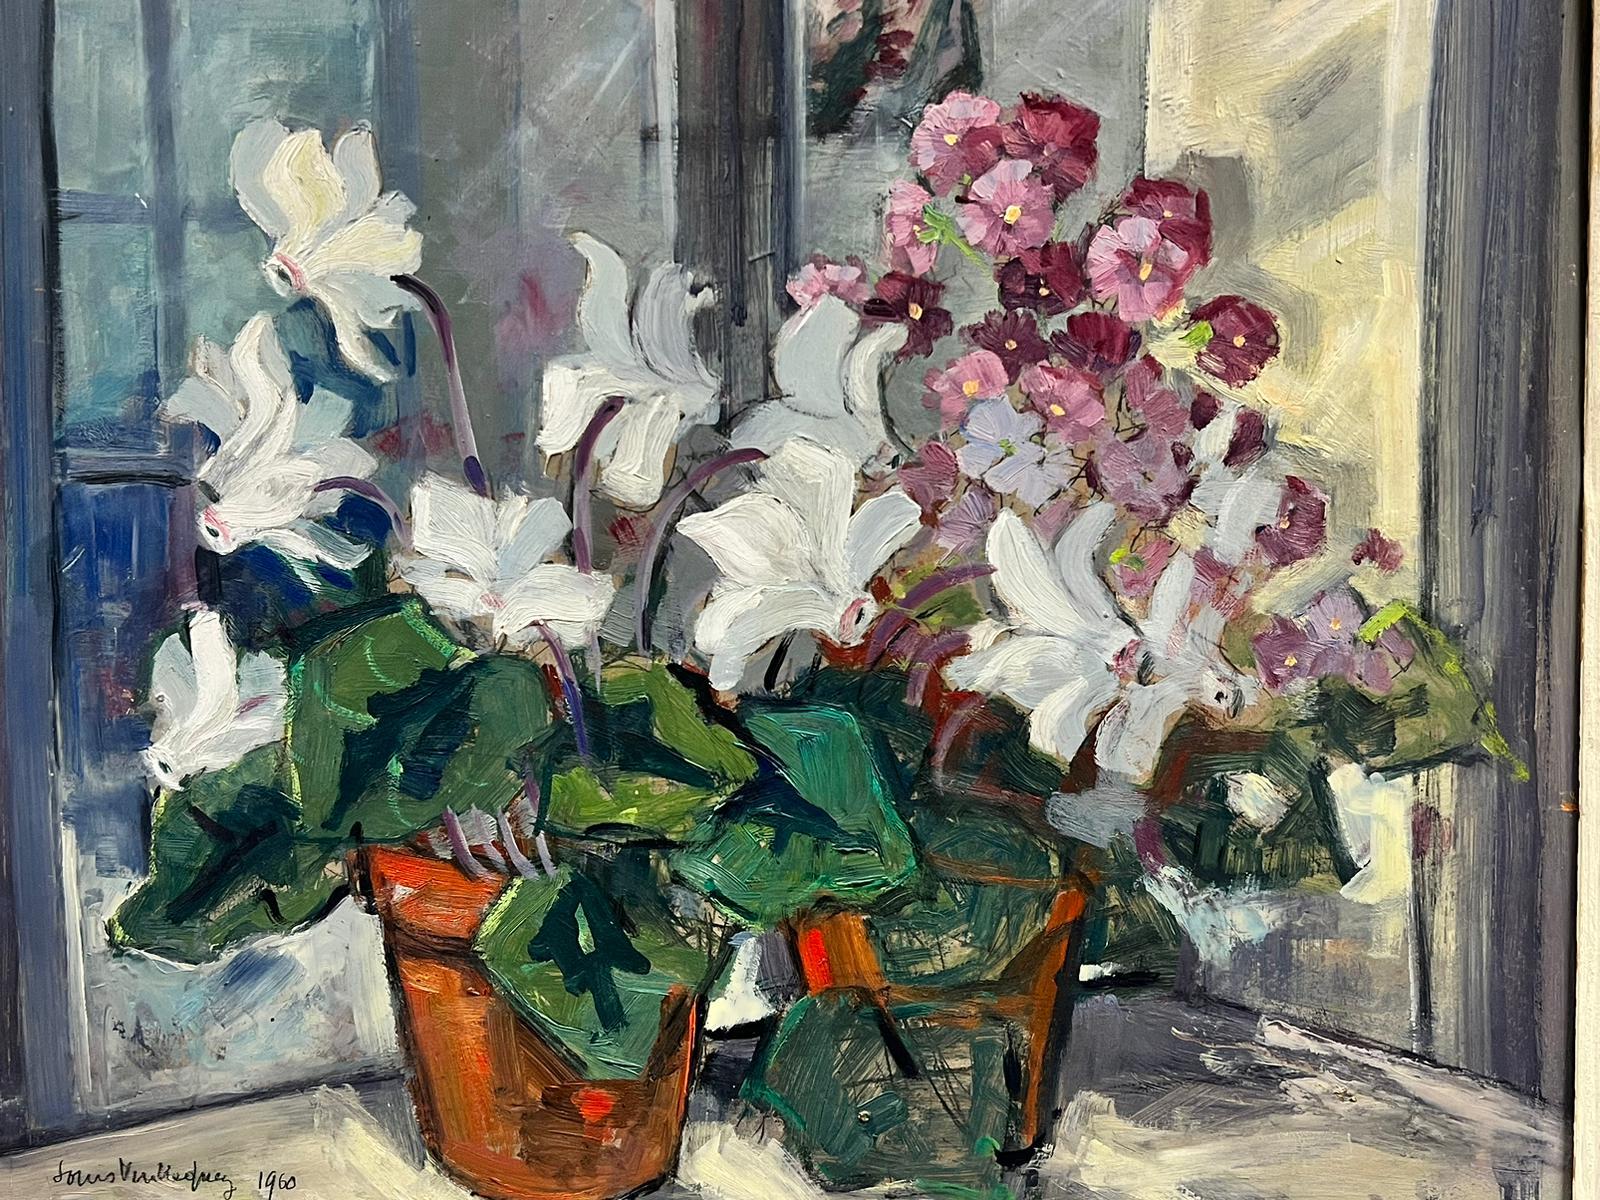 Flowers in the Windowsill
French artist, signed oil painting on board, framed
dated 1960
framed: 21.5 x 25 inches
board: 18 x 22 inches
provenance: private collection, France 
condition: overall very good, damaged frame